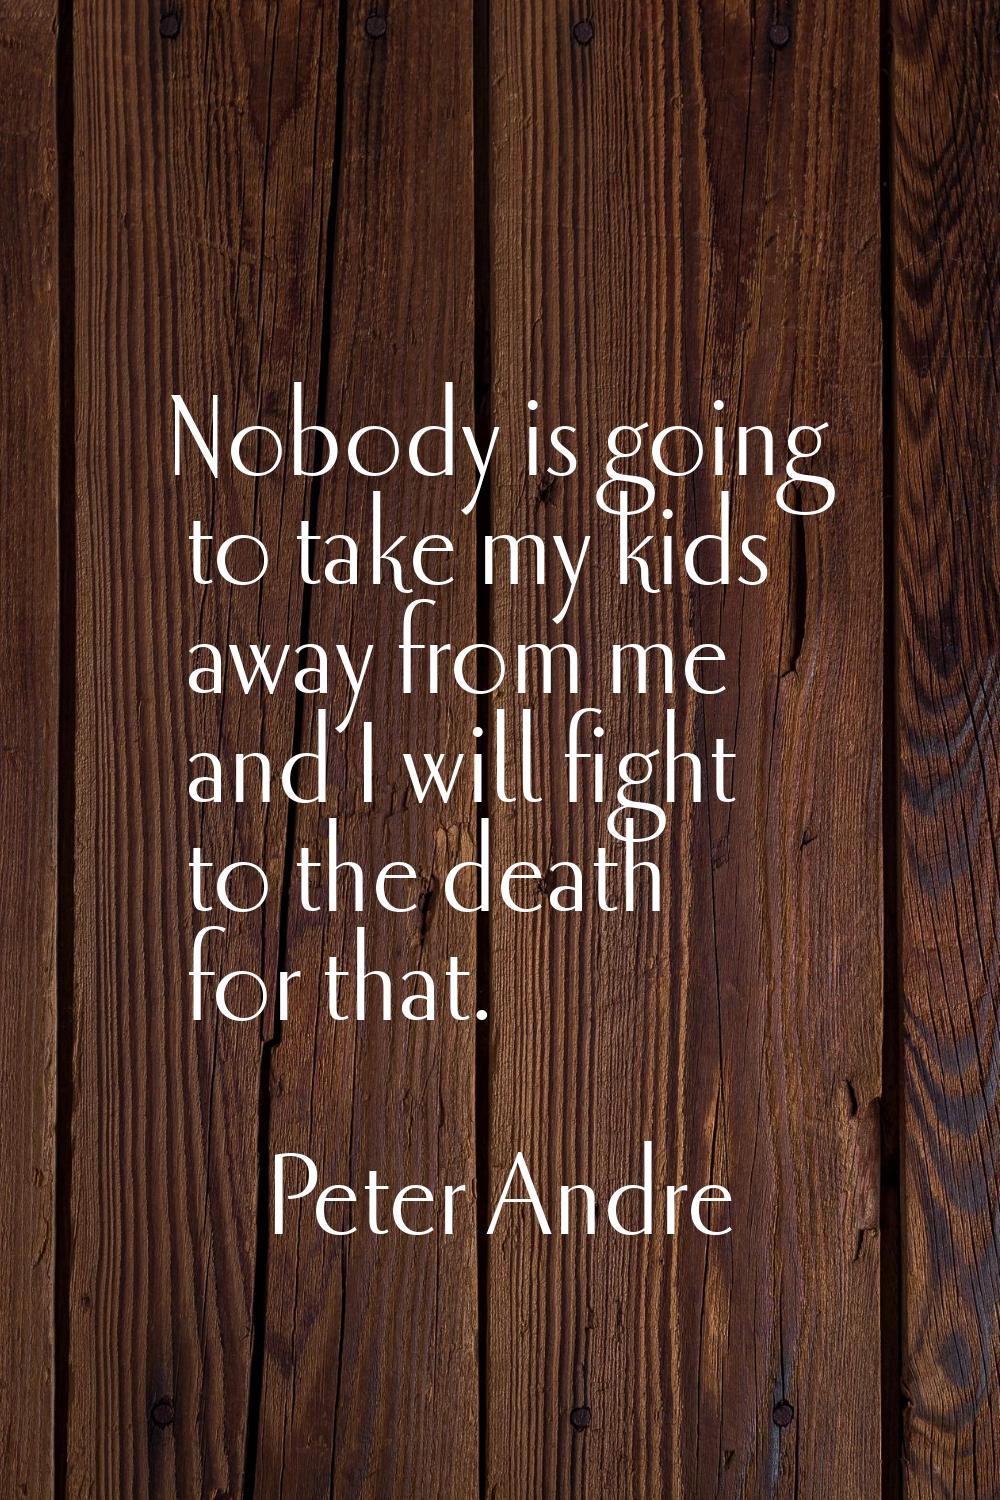 Nobody is going to take my kids away from me and I will fight to the death for that.